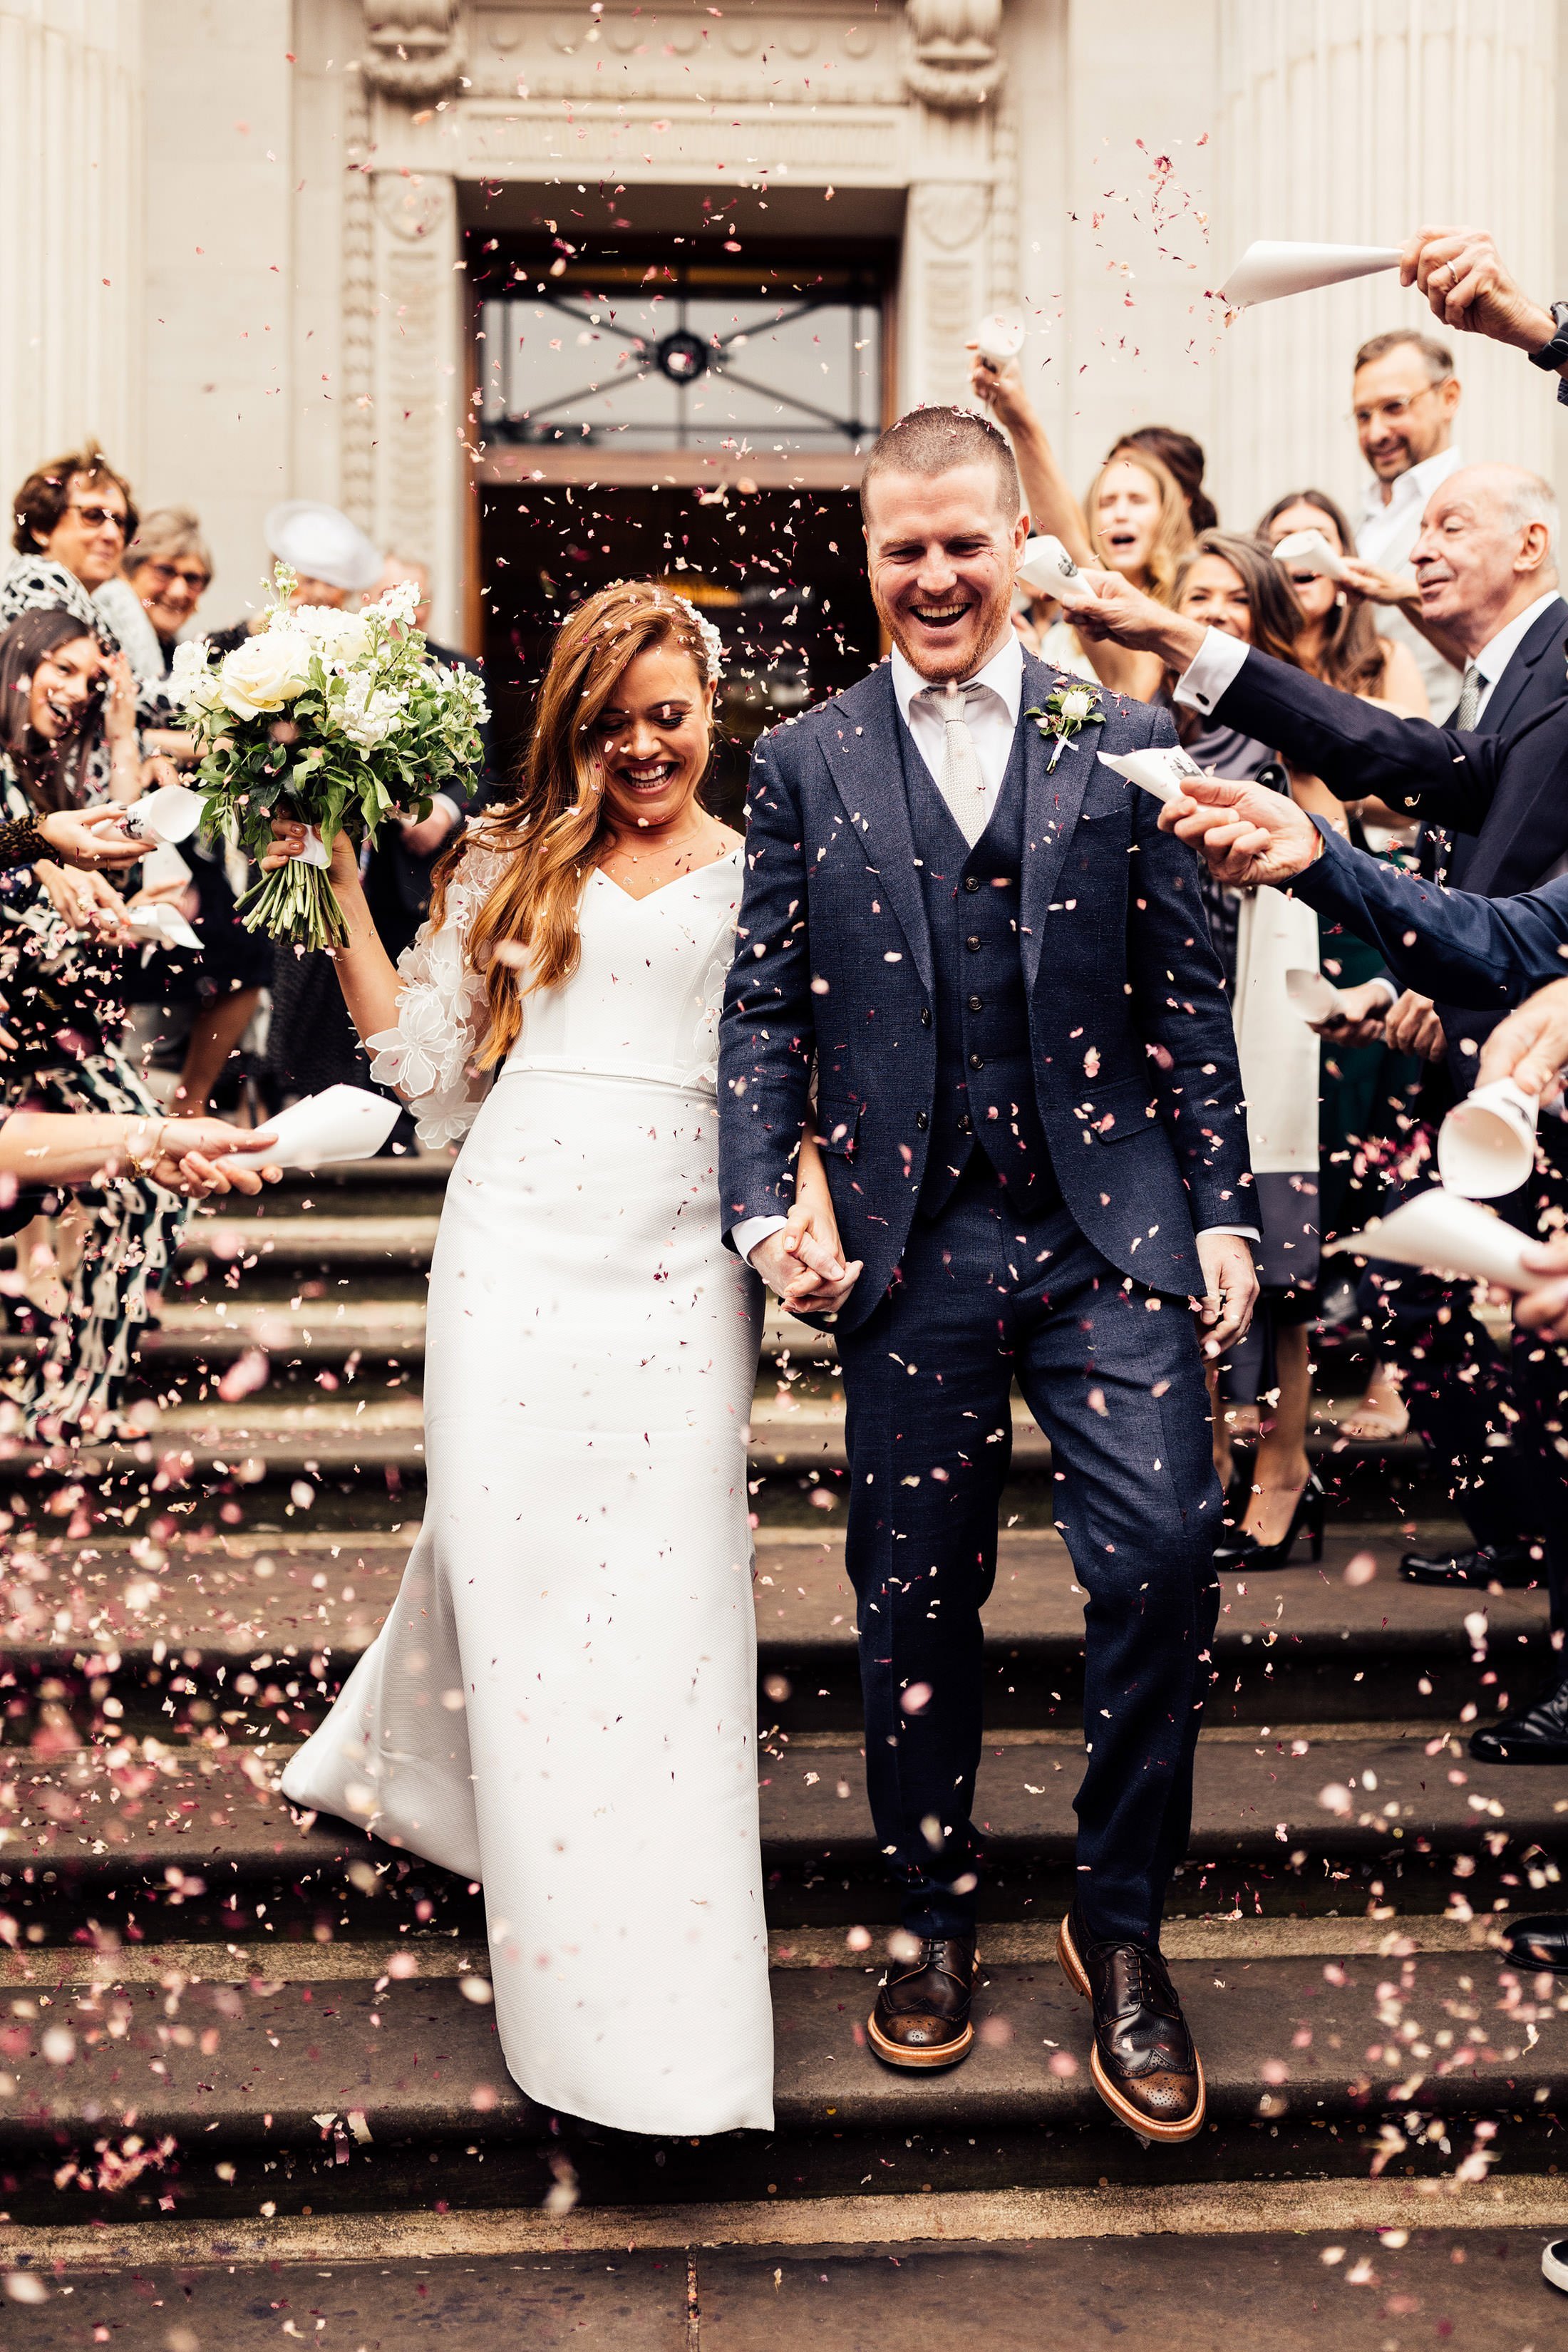 confetti moment outside town hall with bride in suzanne neville dress